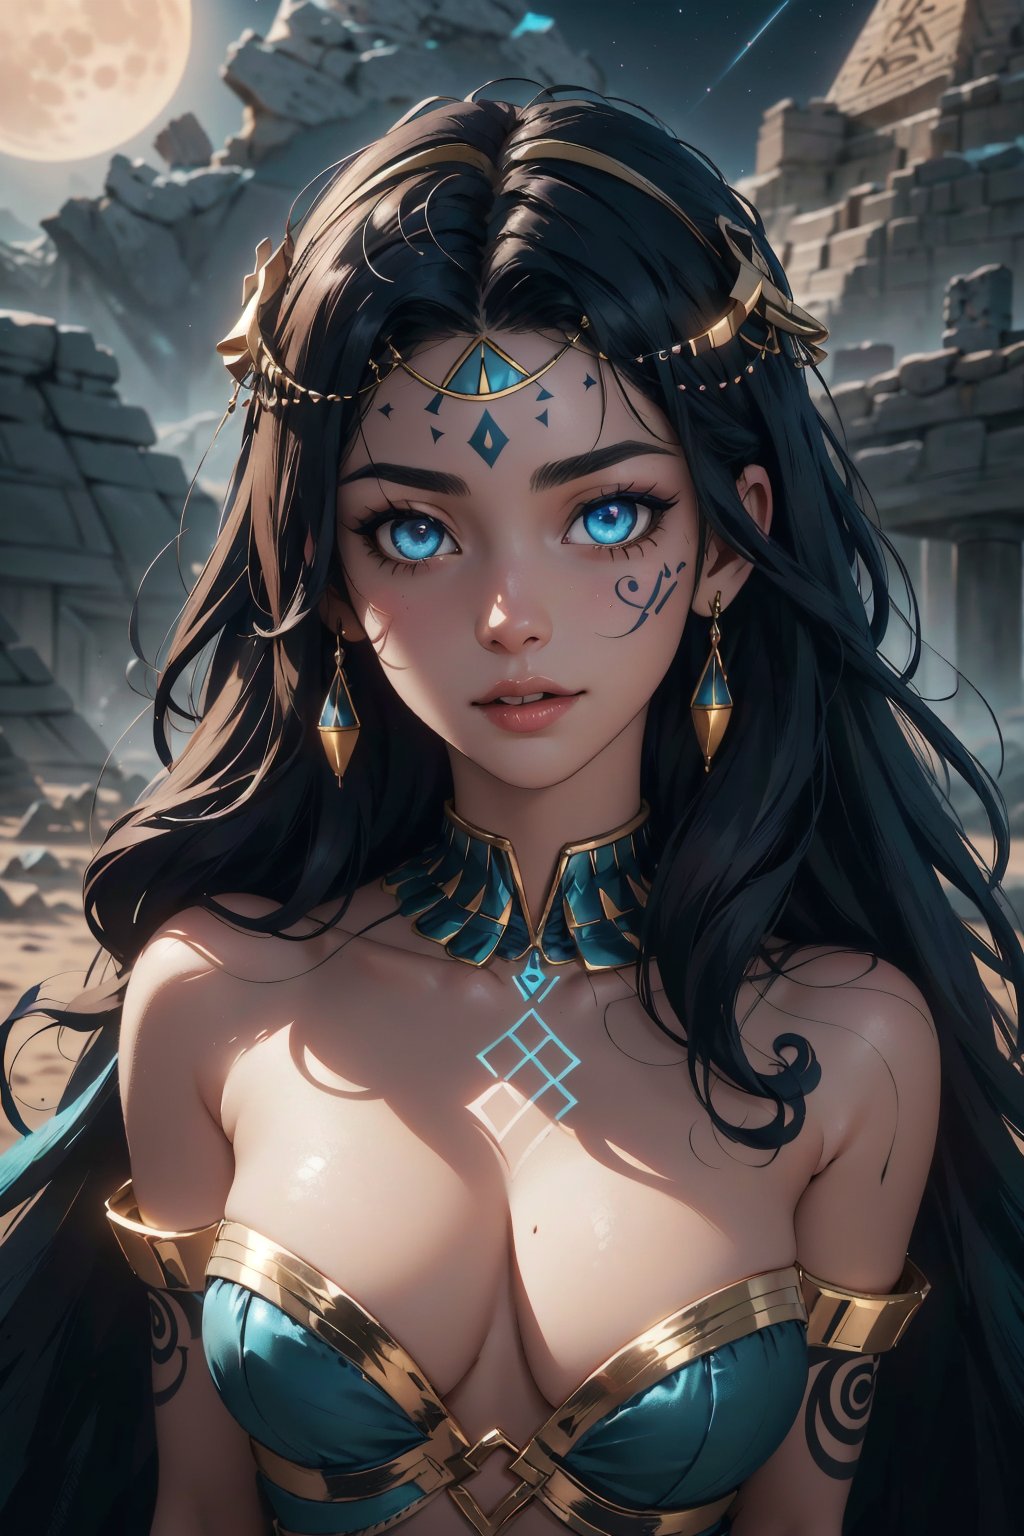 Highres, best quality, extremely detailed, area lighting in background, HD, 8k, extremely intricate:1.3), realistic, SMALL BODY, CUTE, (portrait:1.2) (sexy Cleopatra), (sexy, skimpy, sheer, fantasy Egyptian costume), (colorful), (fantasy Egyptian cosmetics), full_body, T-pose, dynamic pose,outdoors, (night:1.2), moon light, desert setting, Pyramid in background, Detailedface, (perfectly drawn eyes:1.2), nsfw,GlowingRunes_blue, runes, body tattoo